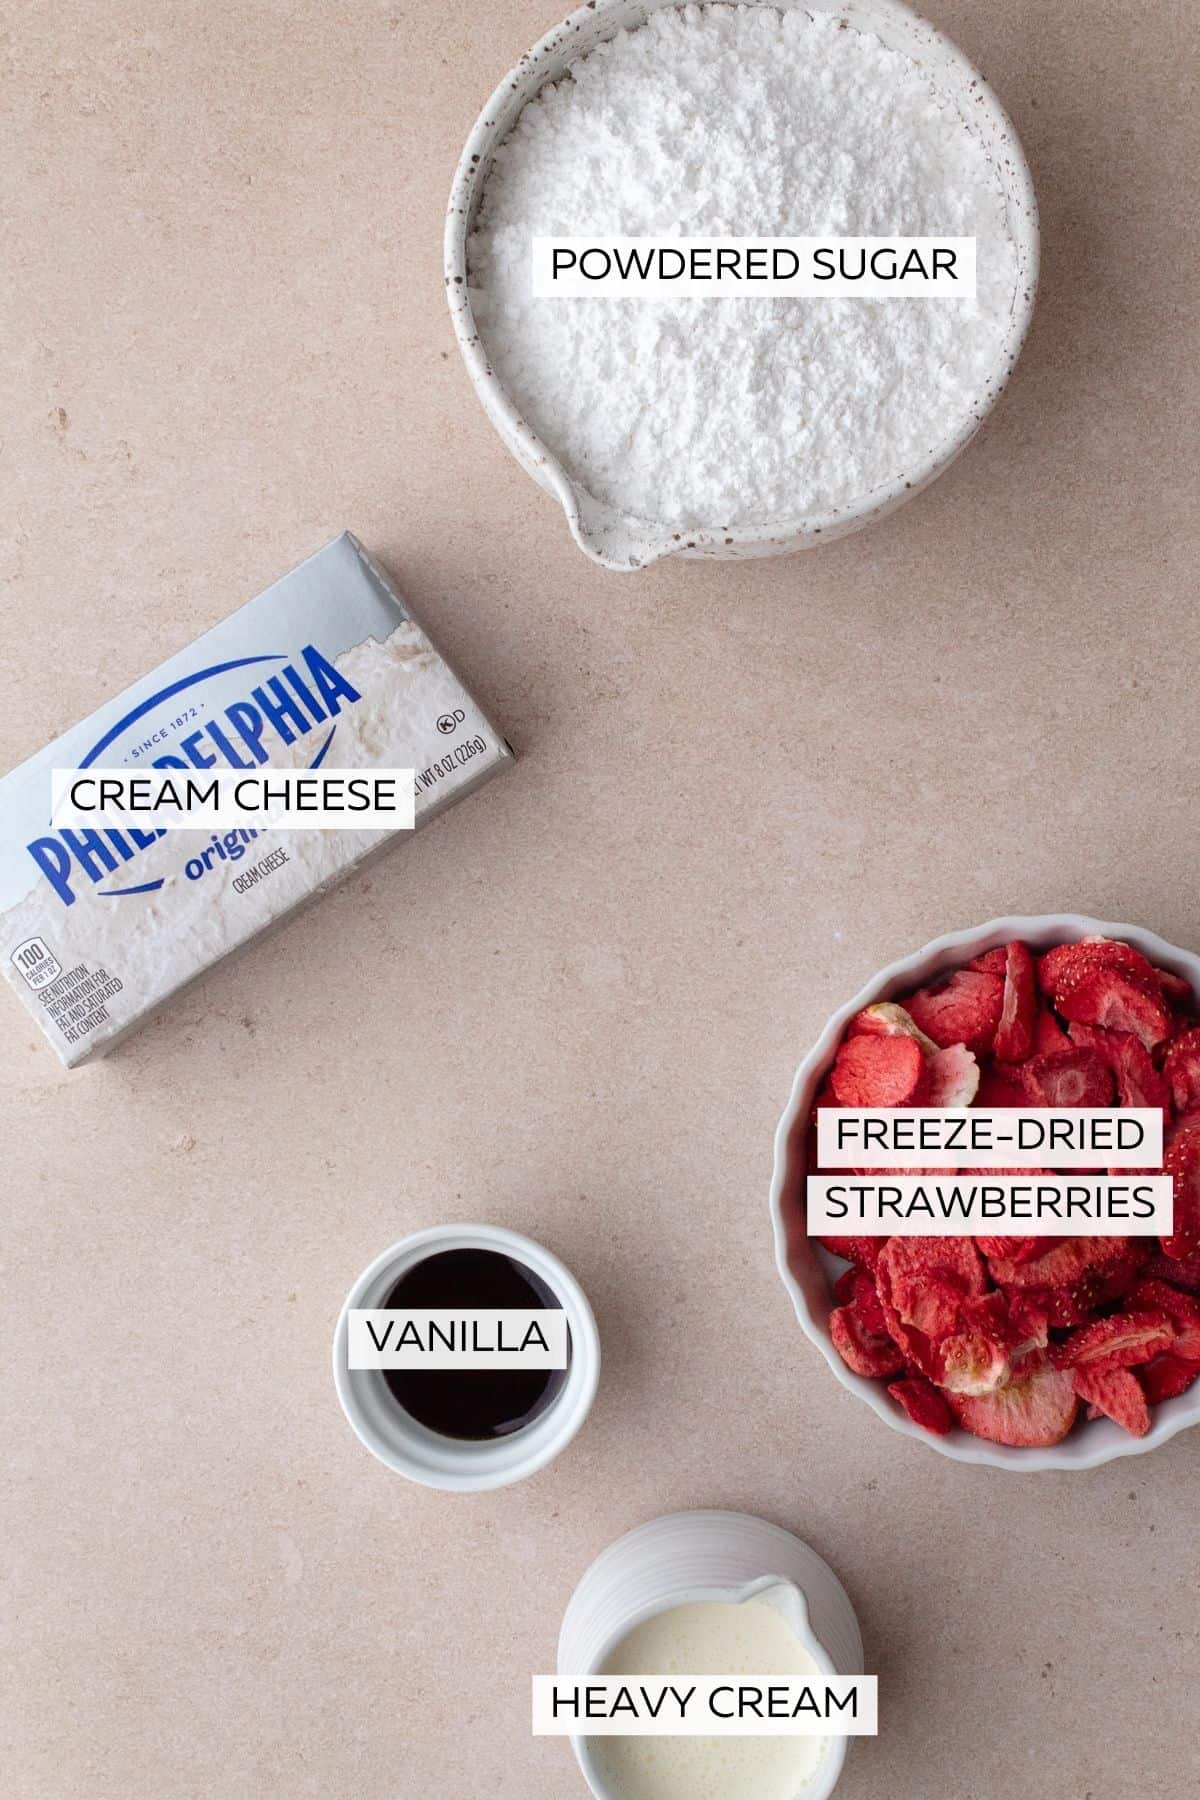 Strawberry cheesecake filling ingredients